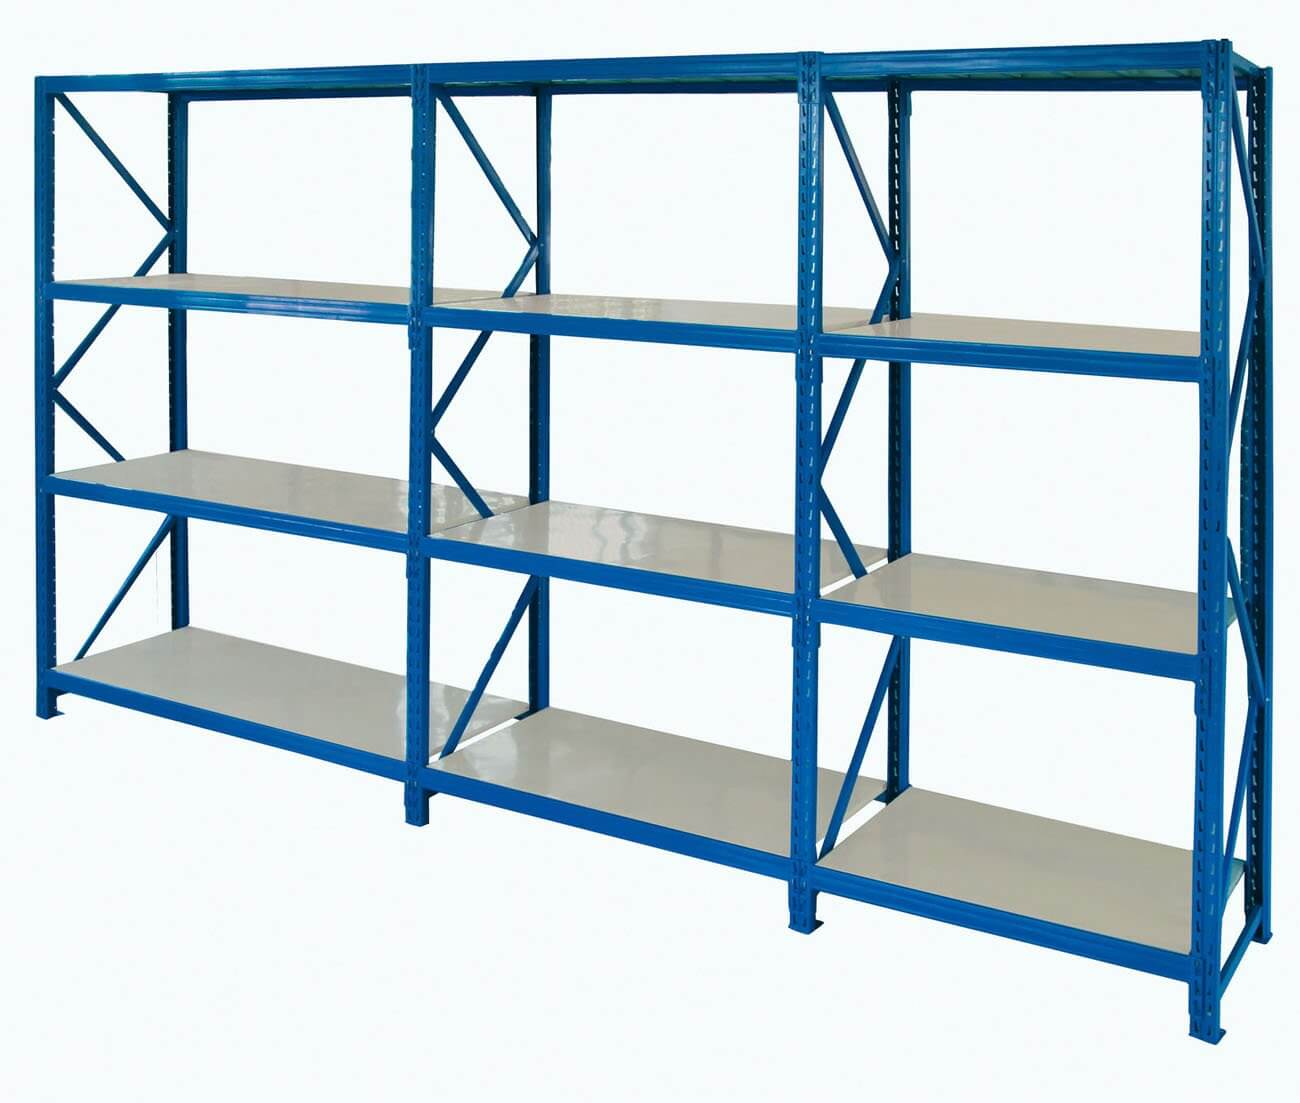 Indispensable Factors To Consider Before Buying Warehouse Storage Rack